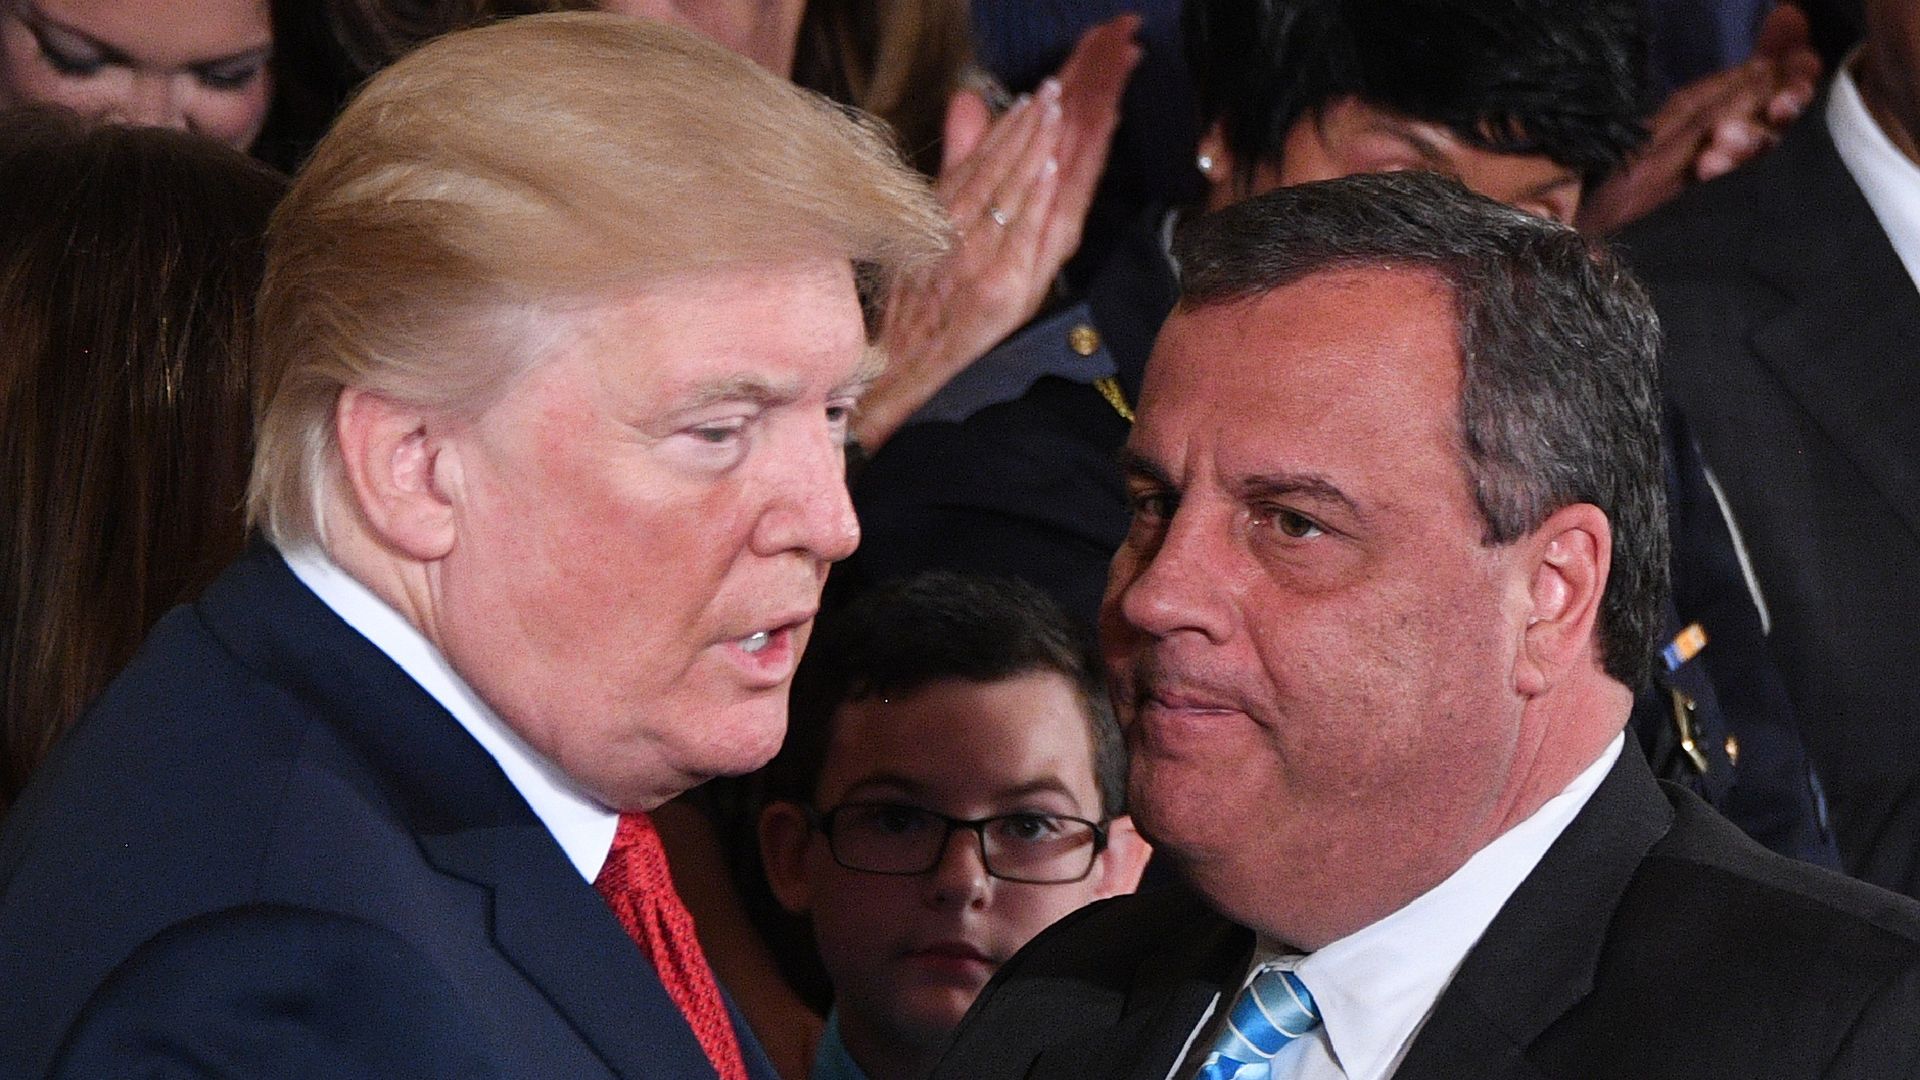 Trump and Christie